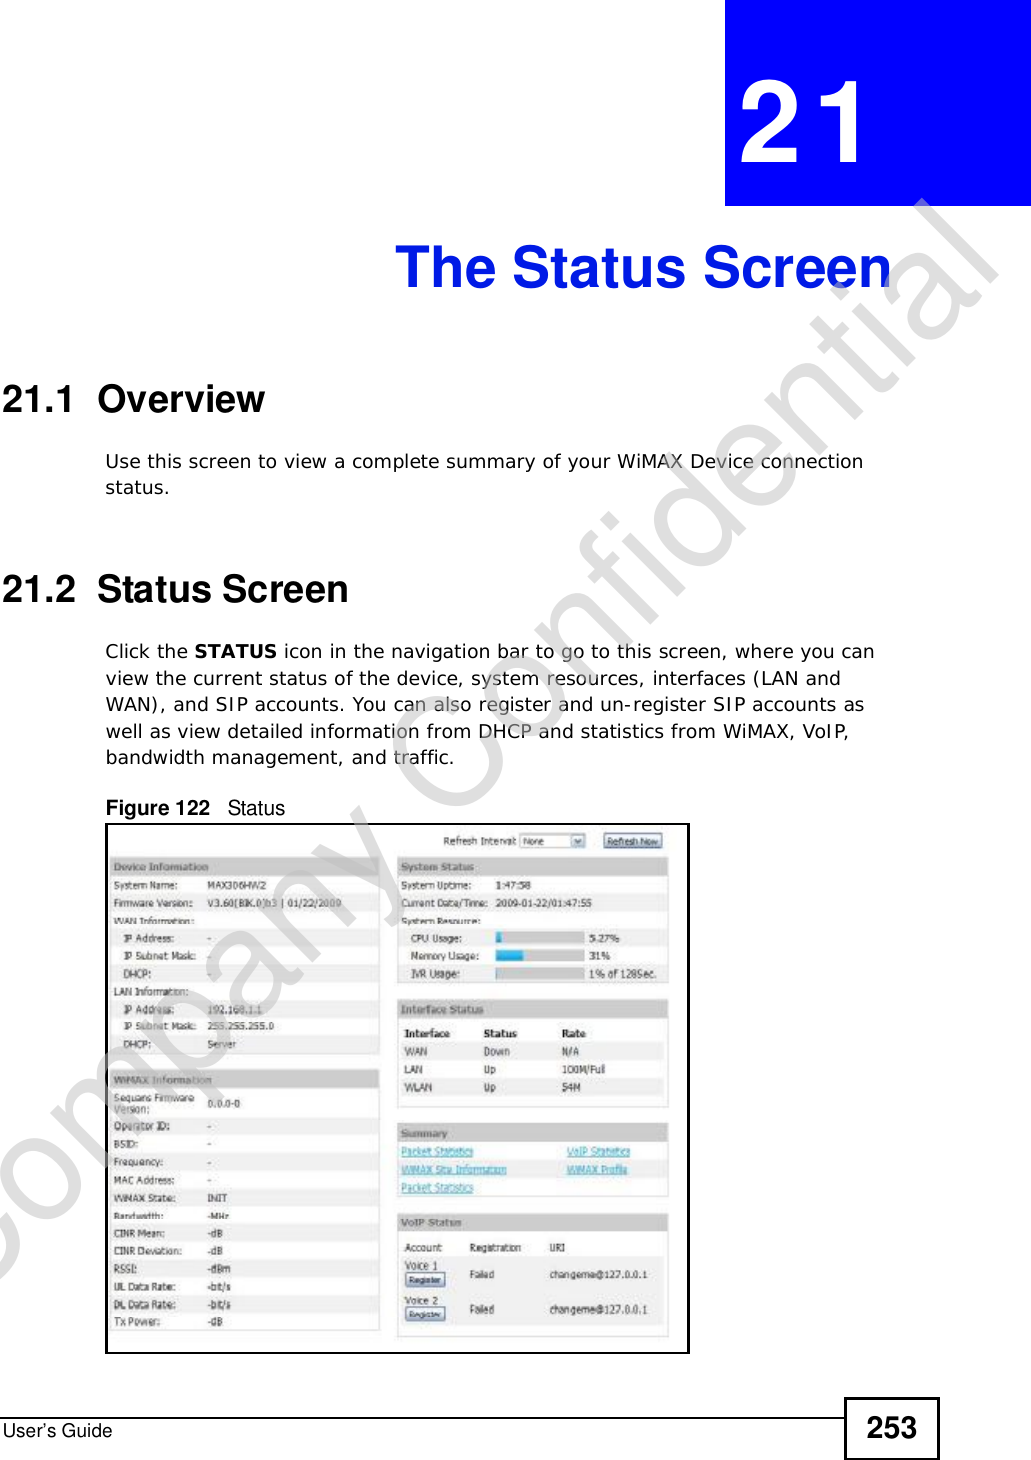 User’s Guide 253CHAPTER 21The Status Screen21.1  OverviewUse this screen to view a complete summary of your WiMAX Device connection status.21.2  Status ScreenClick the STATUS icon in the navigation bar to go to this screen, where you can view the current status of the device, system resources, interfaces (LAN and WAN), and SIP accounts. You can also register and un-register SIP accounts as well as view detailed information from DHCP and statistics from WiMAX, VoIP, bandwidth management, and traffic.Figure 122   StatusCompany Confidential